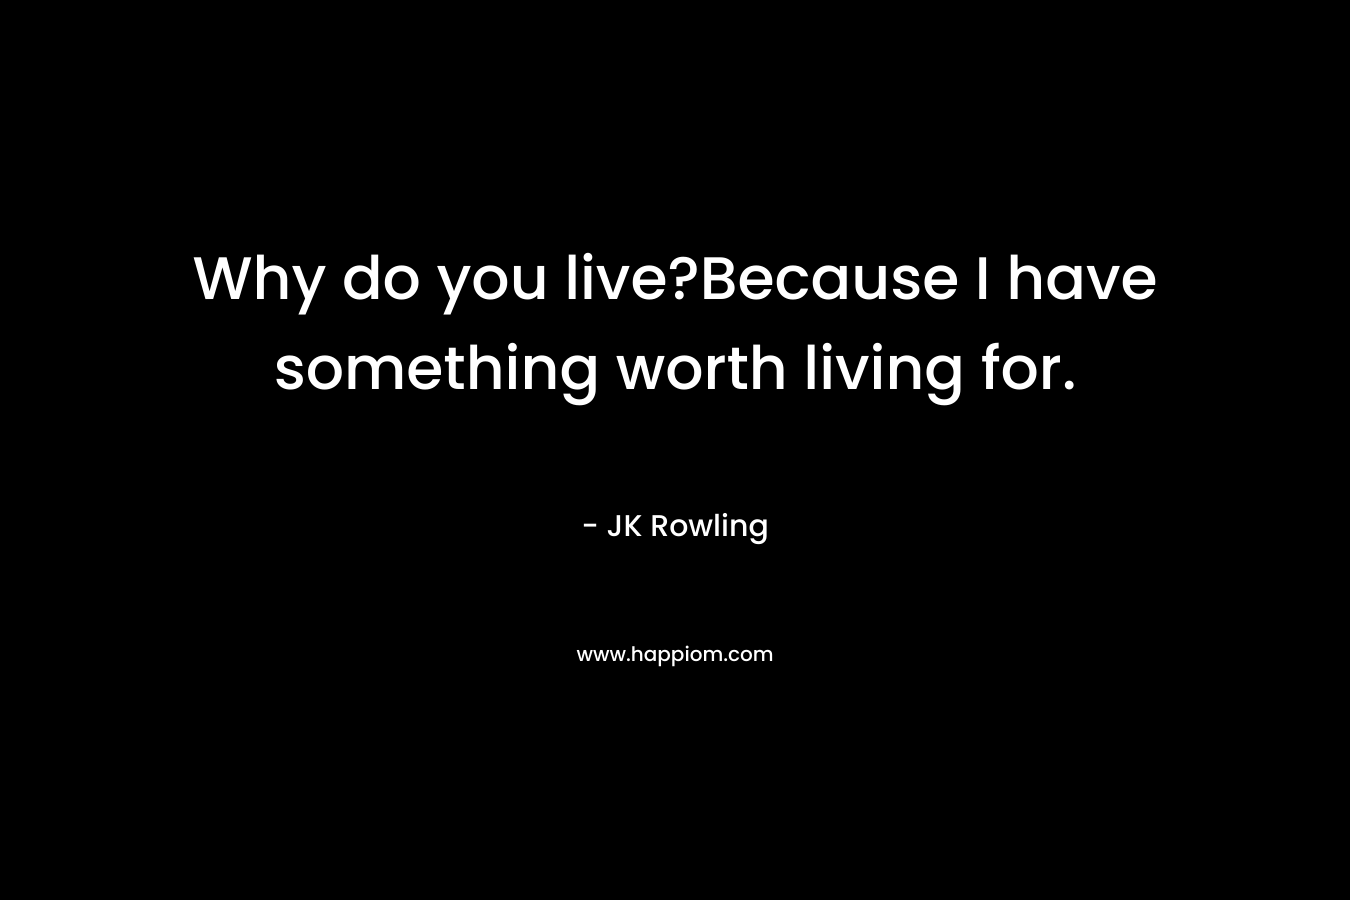 Why do you live?Because I have something worth living for.